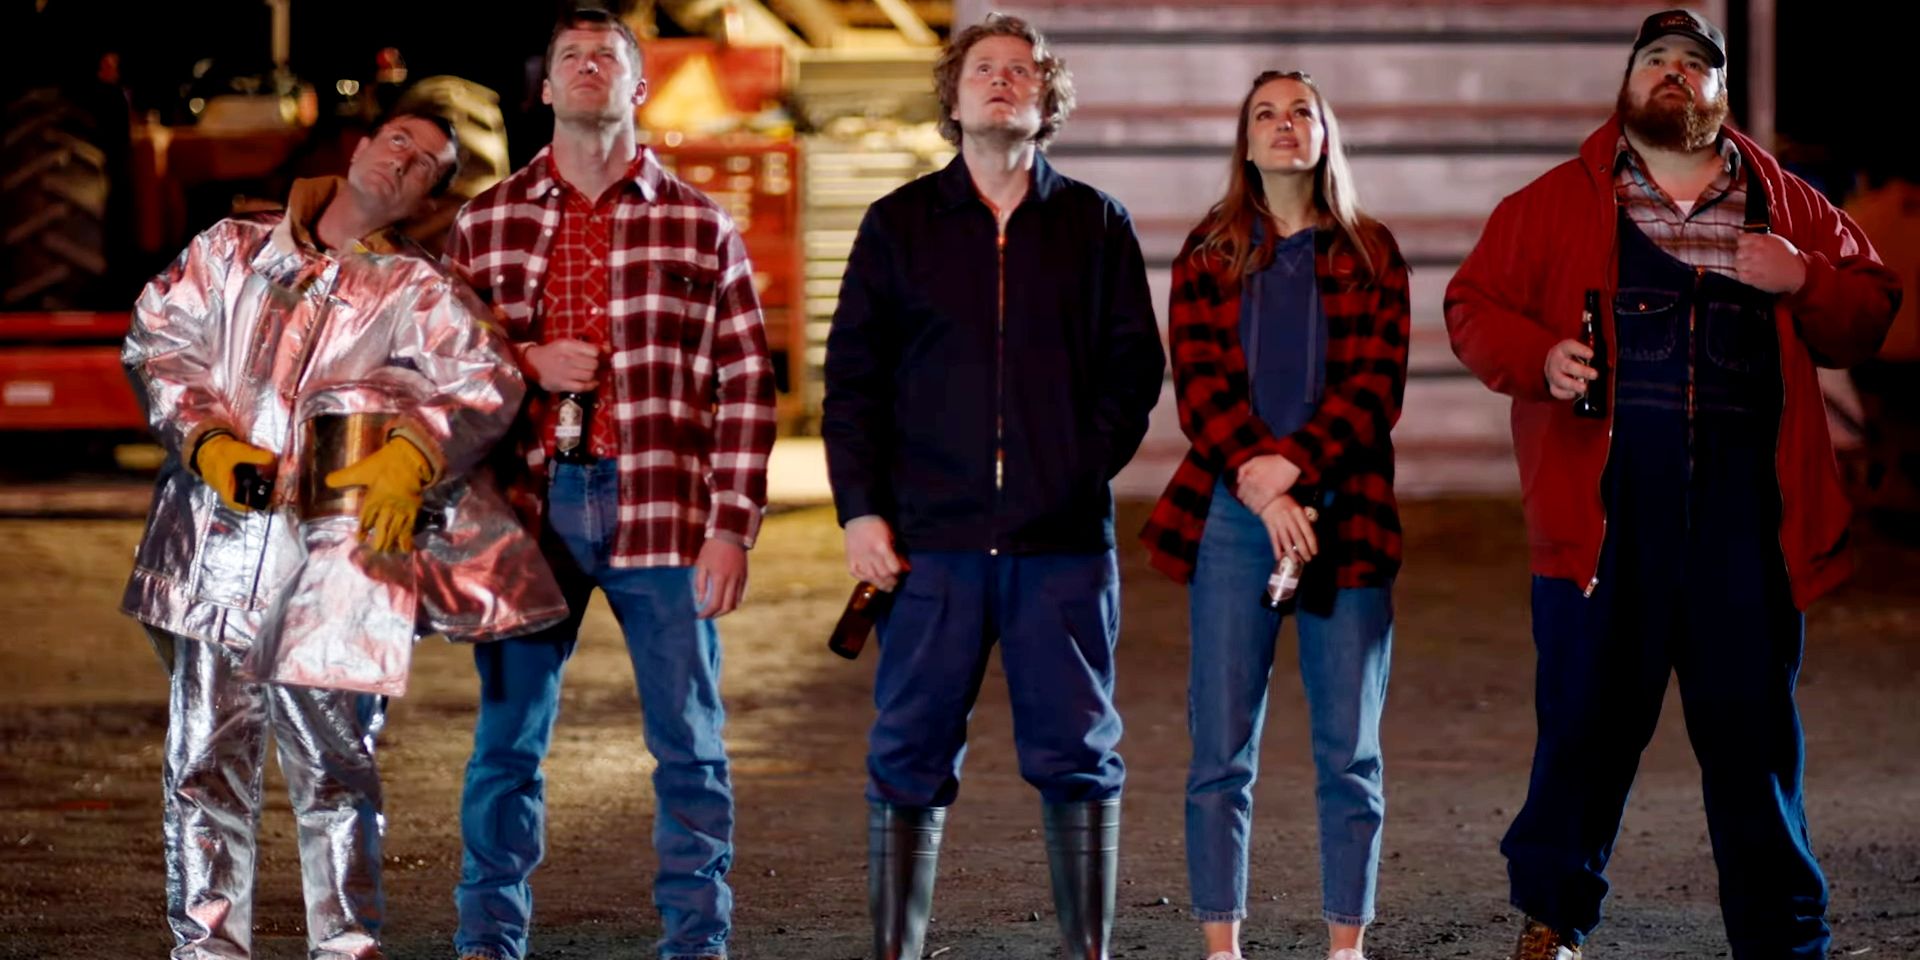 The Letterkenny Spinoff Trailer Reveals Shoresy's Smiling Face For